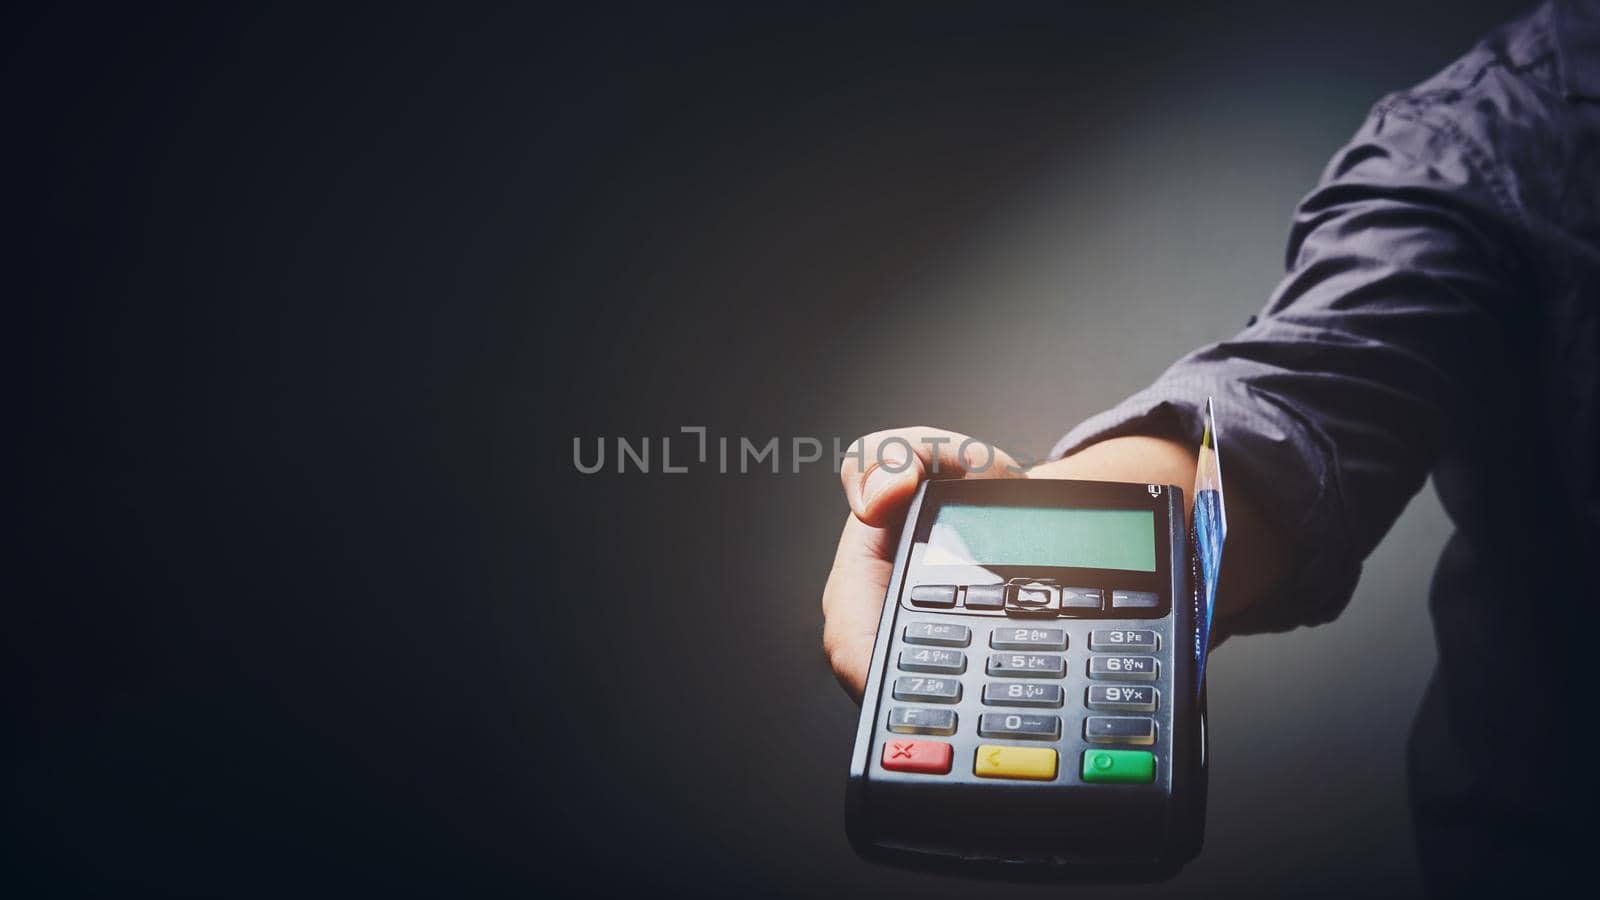 Credit card machine for payment. Business concept